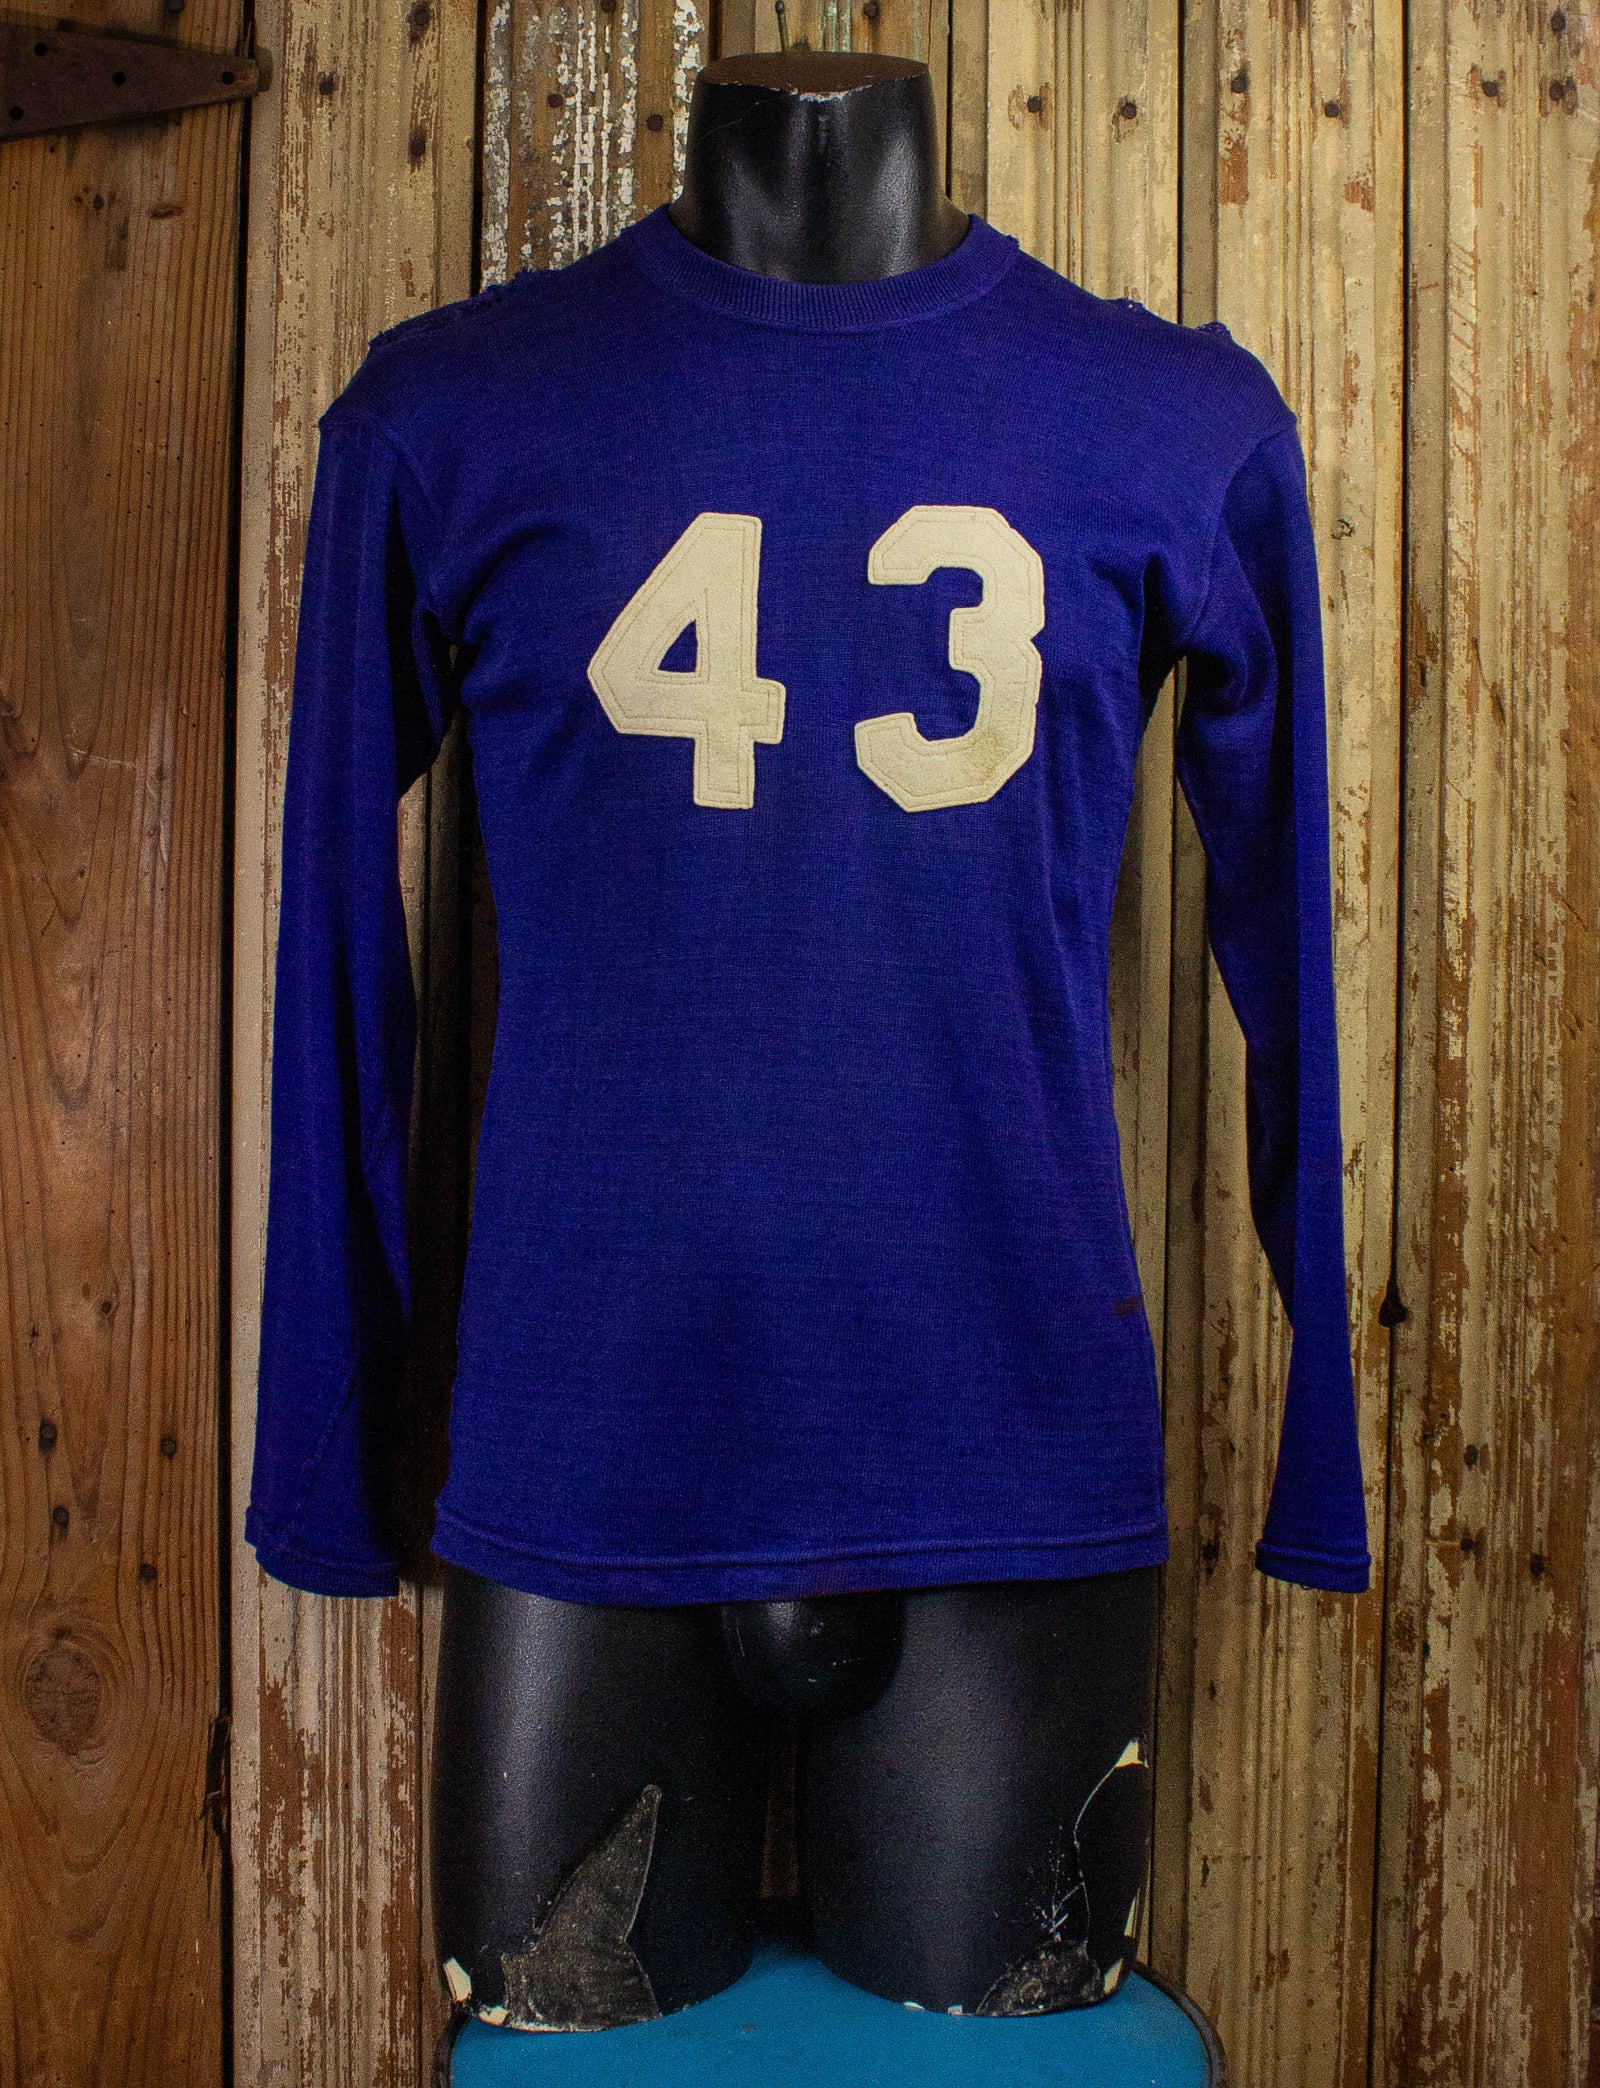 Vintage #43 Long Sleeve Jersey T Shirt 60s Blue Small